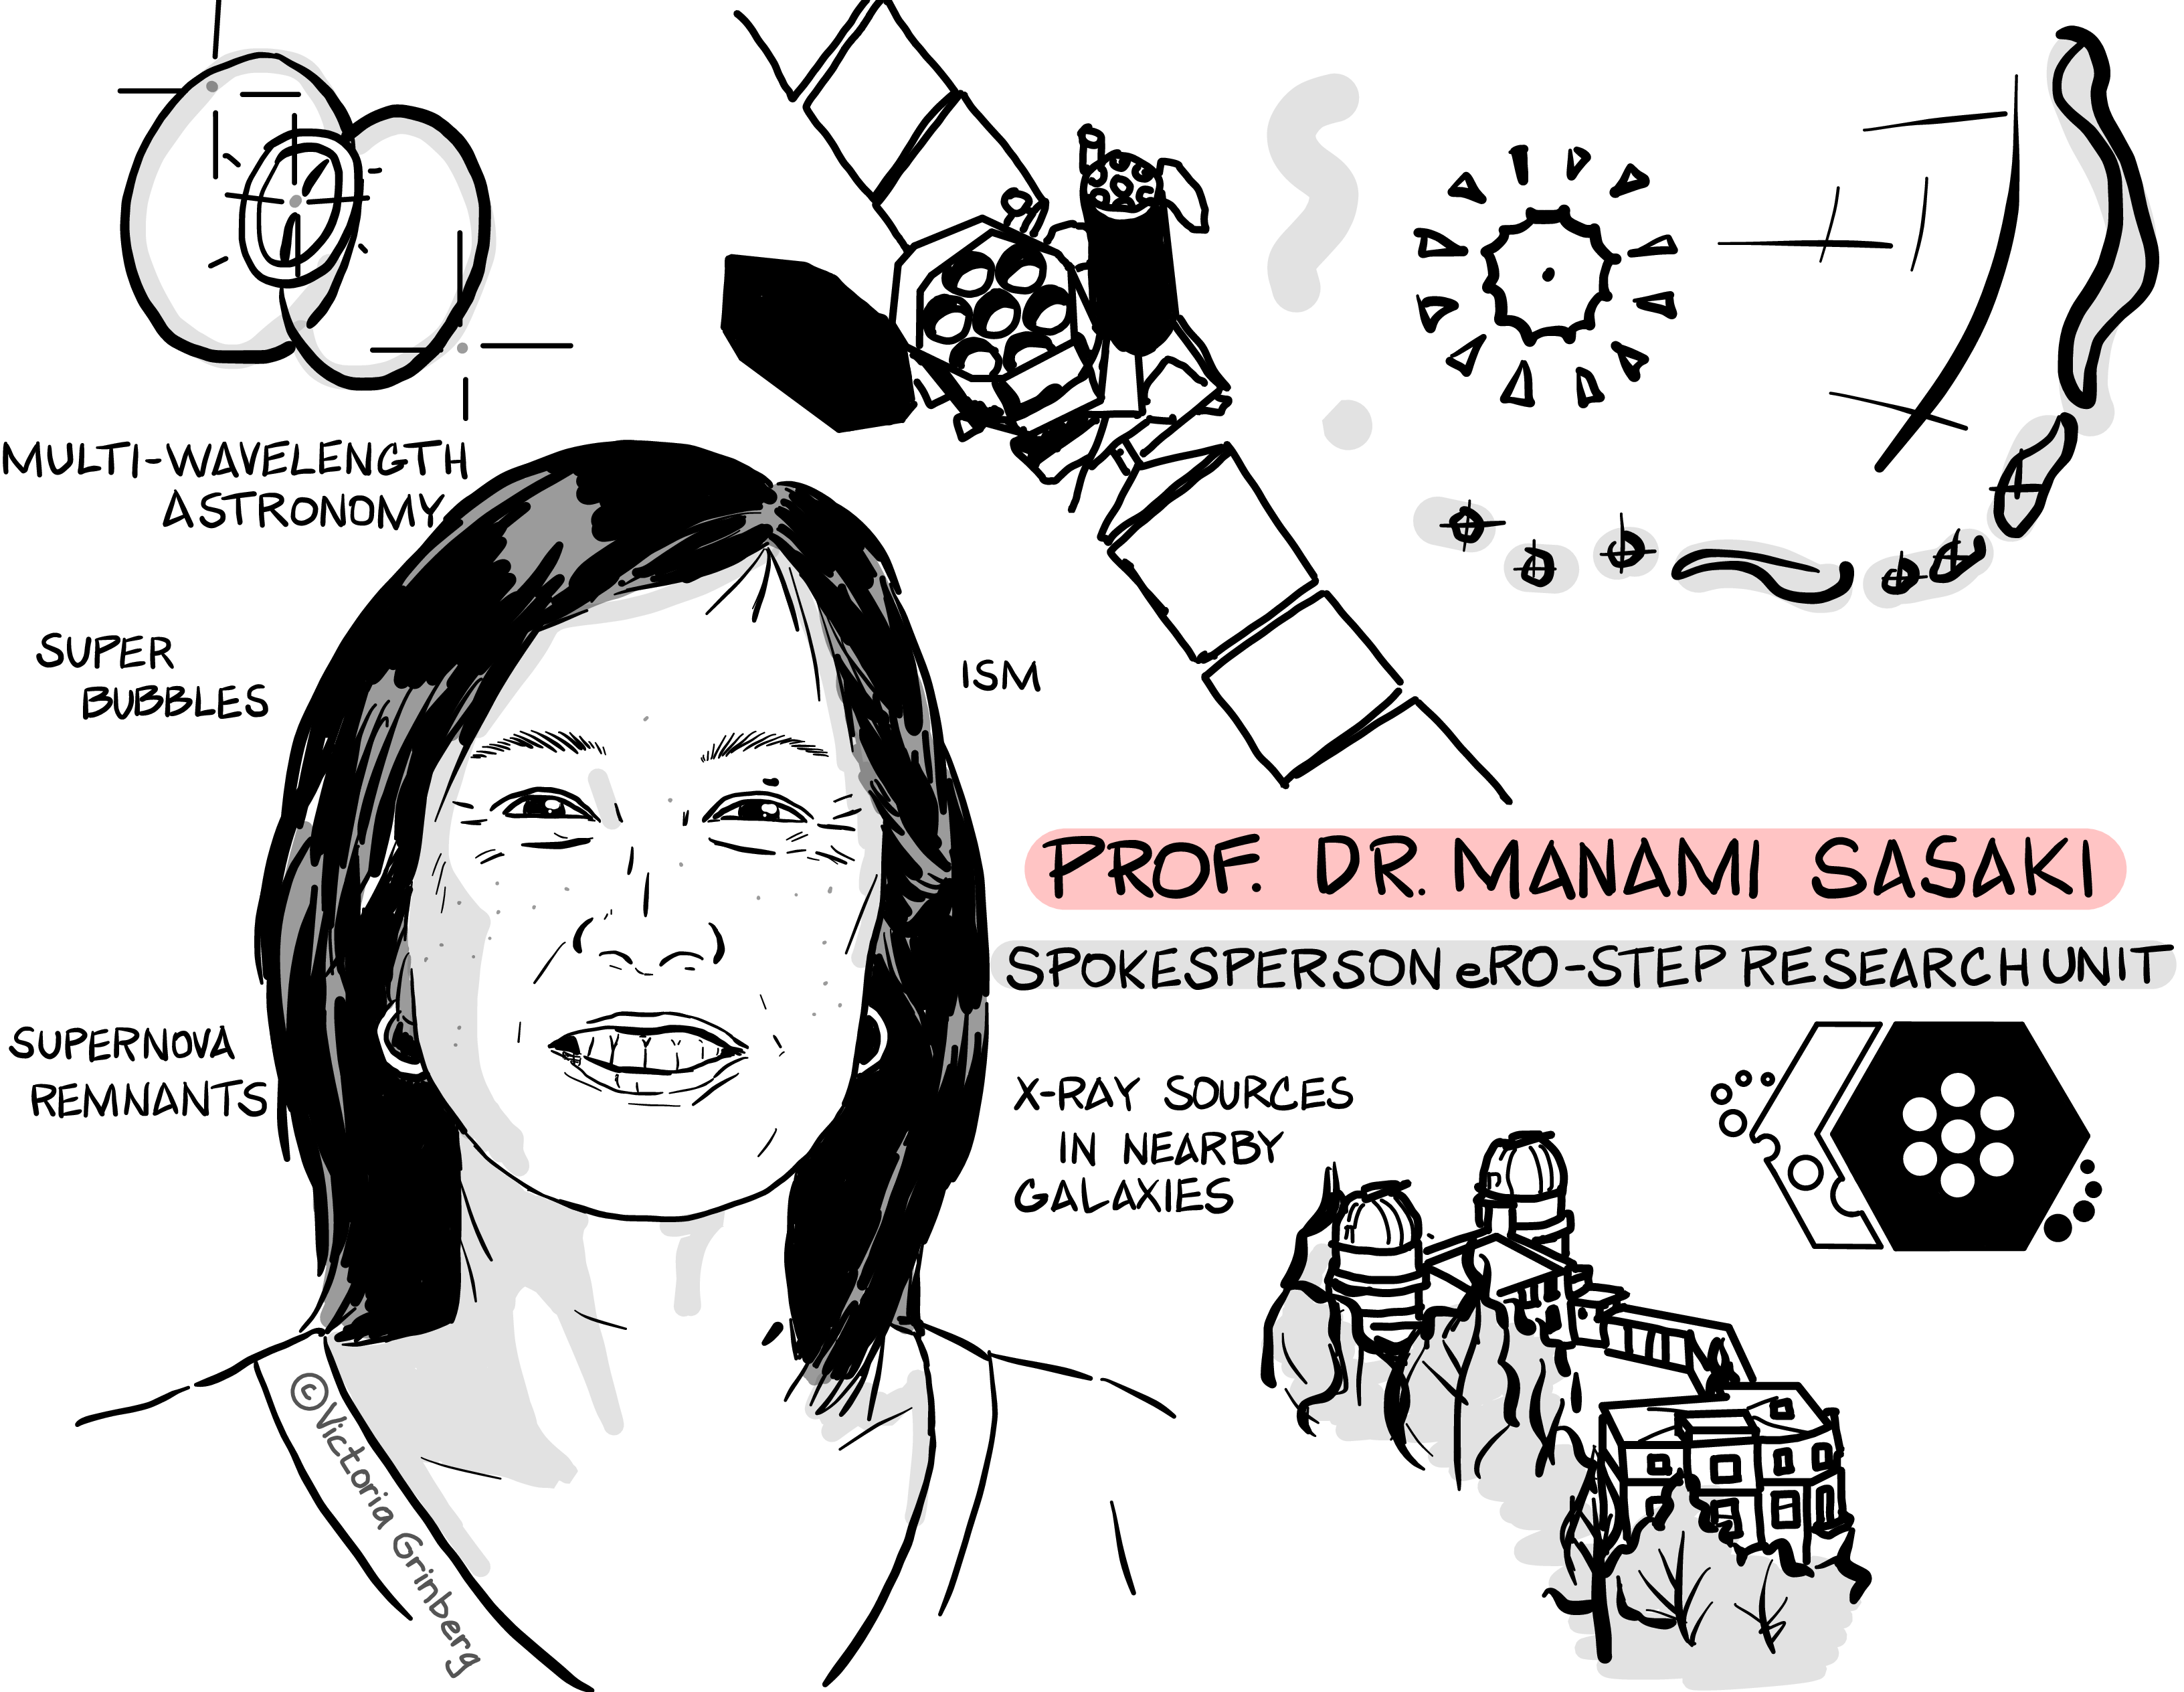 Black and white portrait of Prof. Manami Sasaki, title 'Prof. Dr. Manami Sasaki', subtitle 'pokesperson of the eRO-STEP research unit'. Sketched logo of the research unit and four small scientific sketches around her: 1987A supernova remnant, eROSITA/SRG telescope, supernova interacting with the ISM, Remeis observatory. Words of her research interests floating around her: multi-wavelength astronomy, super bubbles, ISM, supernova remnants, X-ray sources in nearby galaxies.